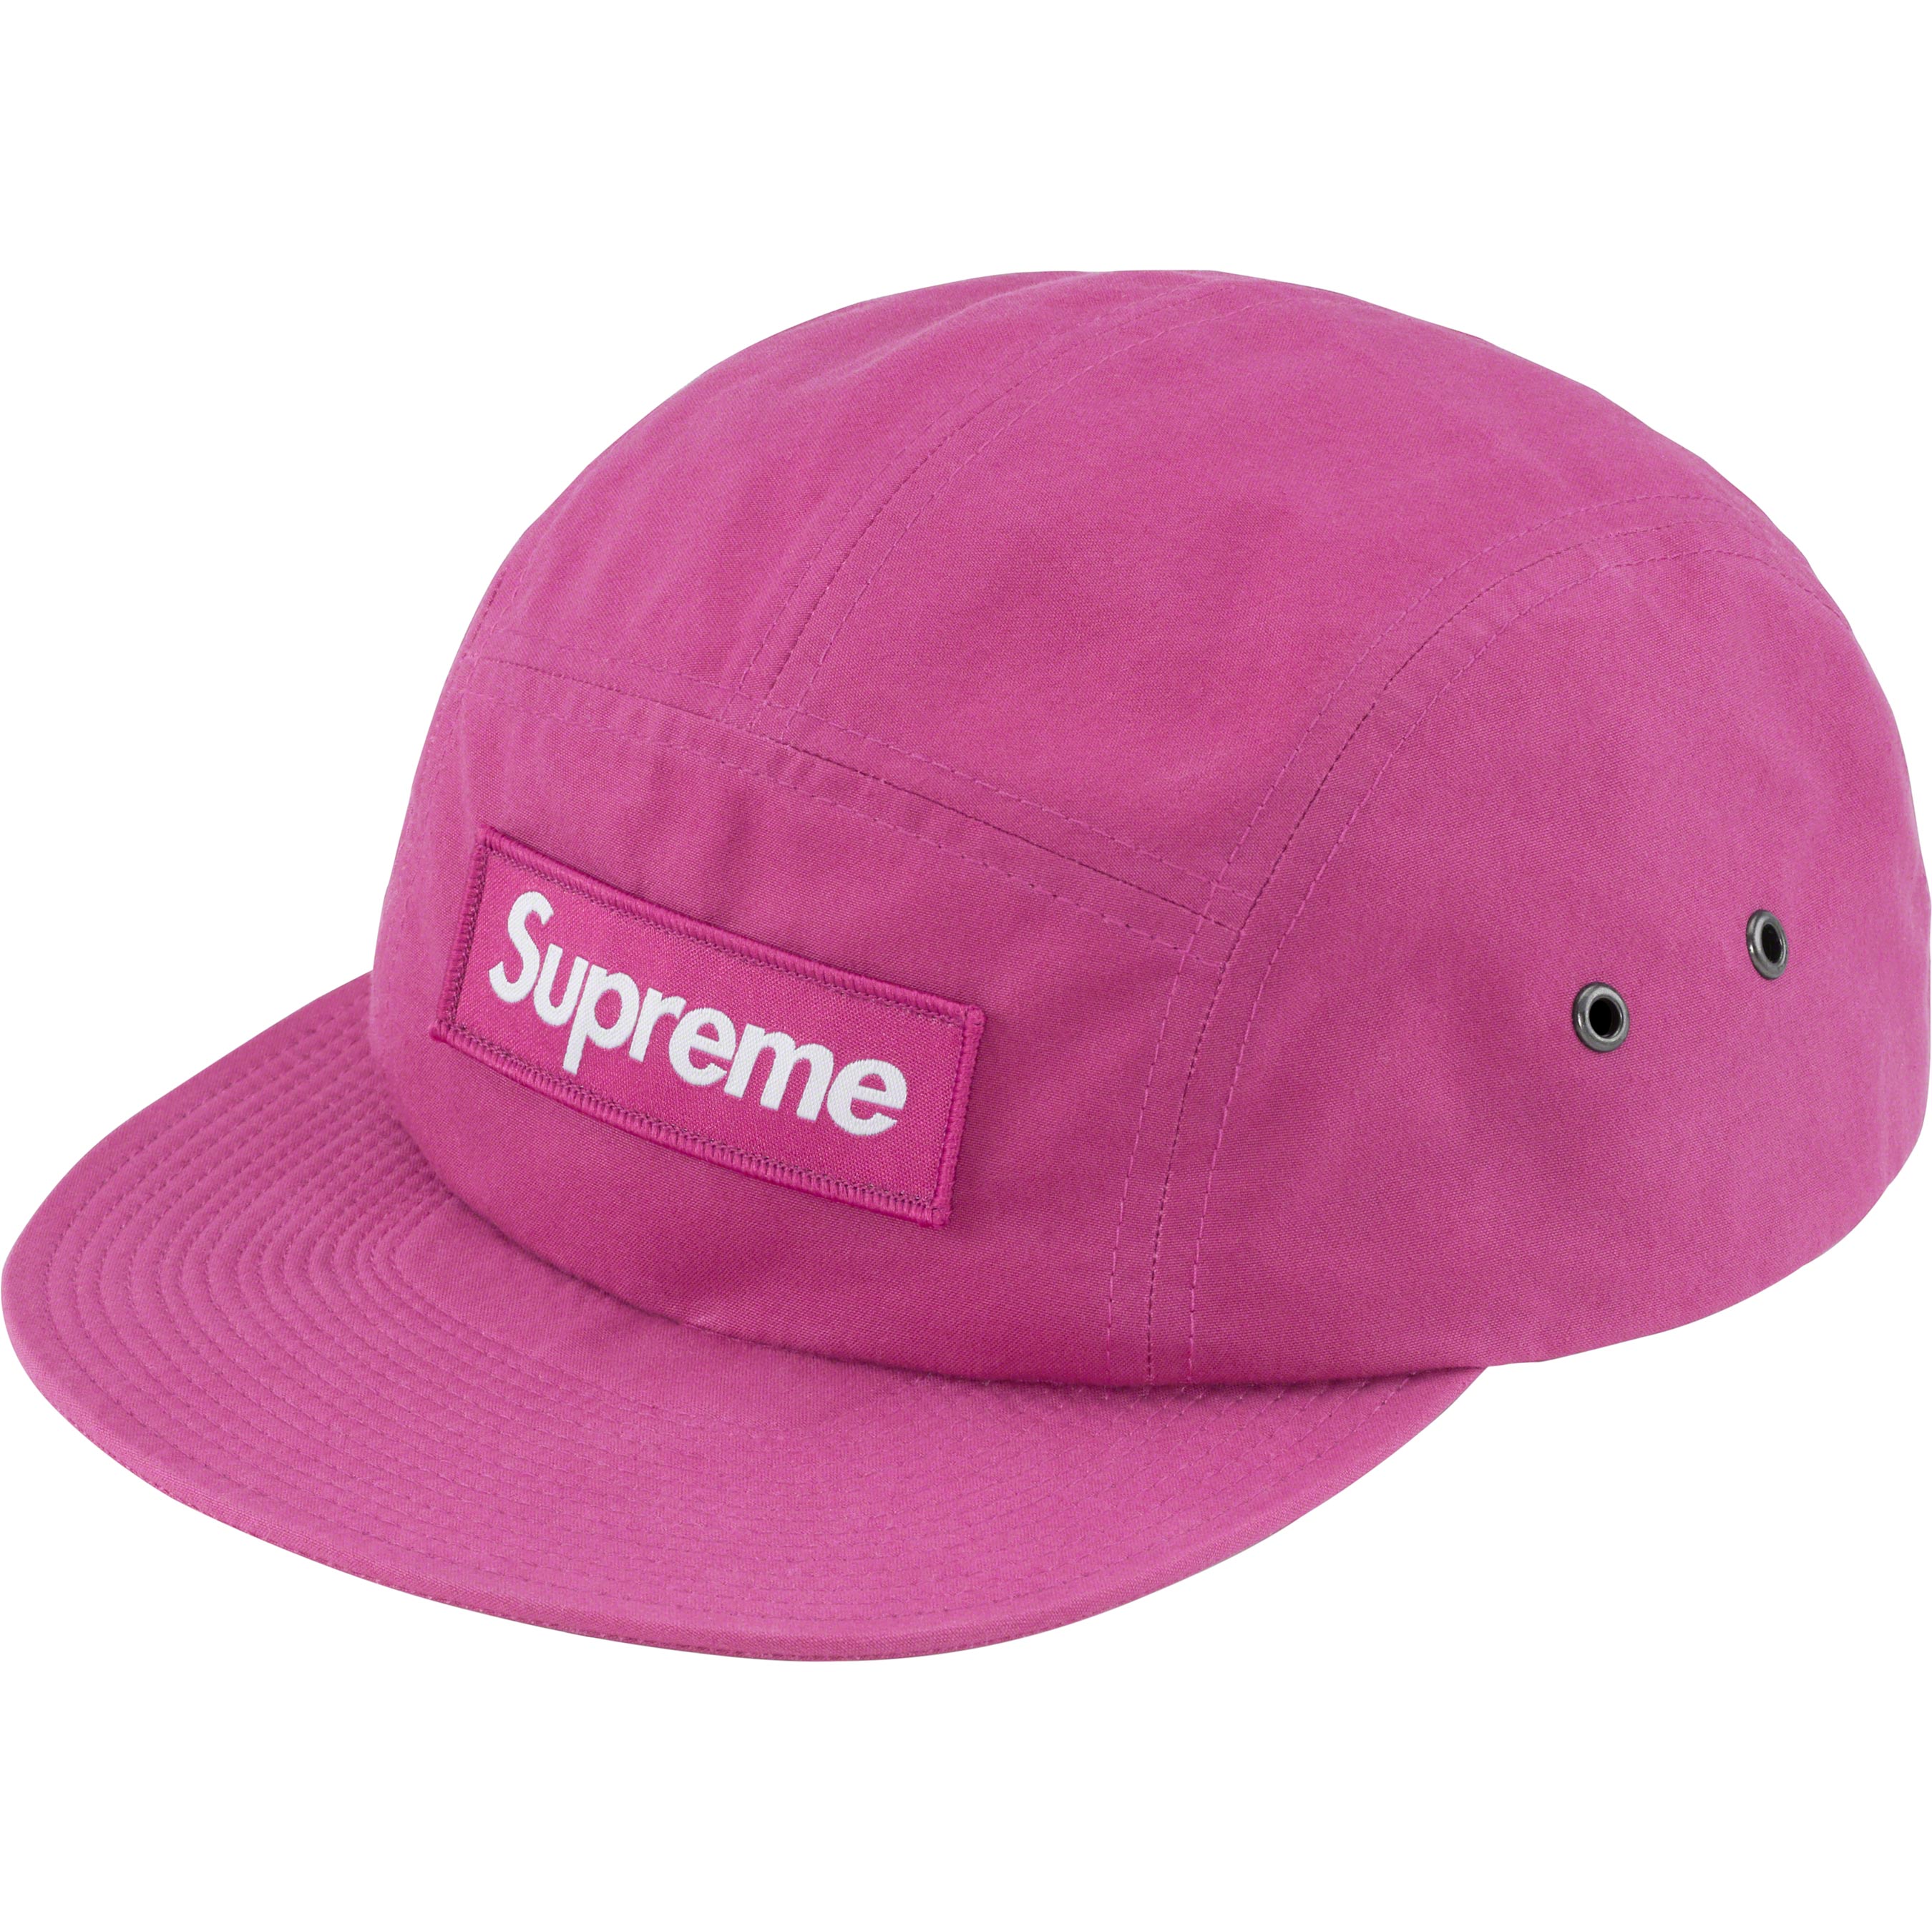 Supreme Waxed Cotton Camp Cap Halley Stevensons waxed cotton